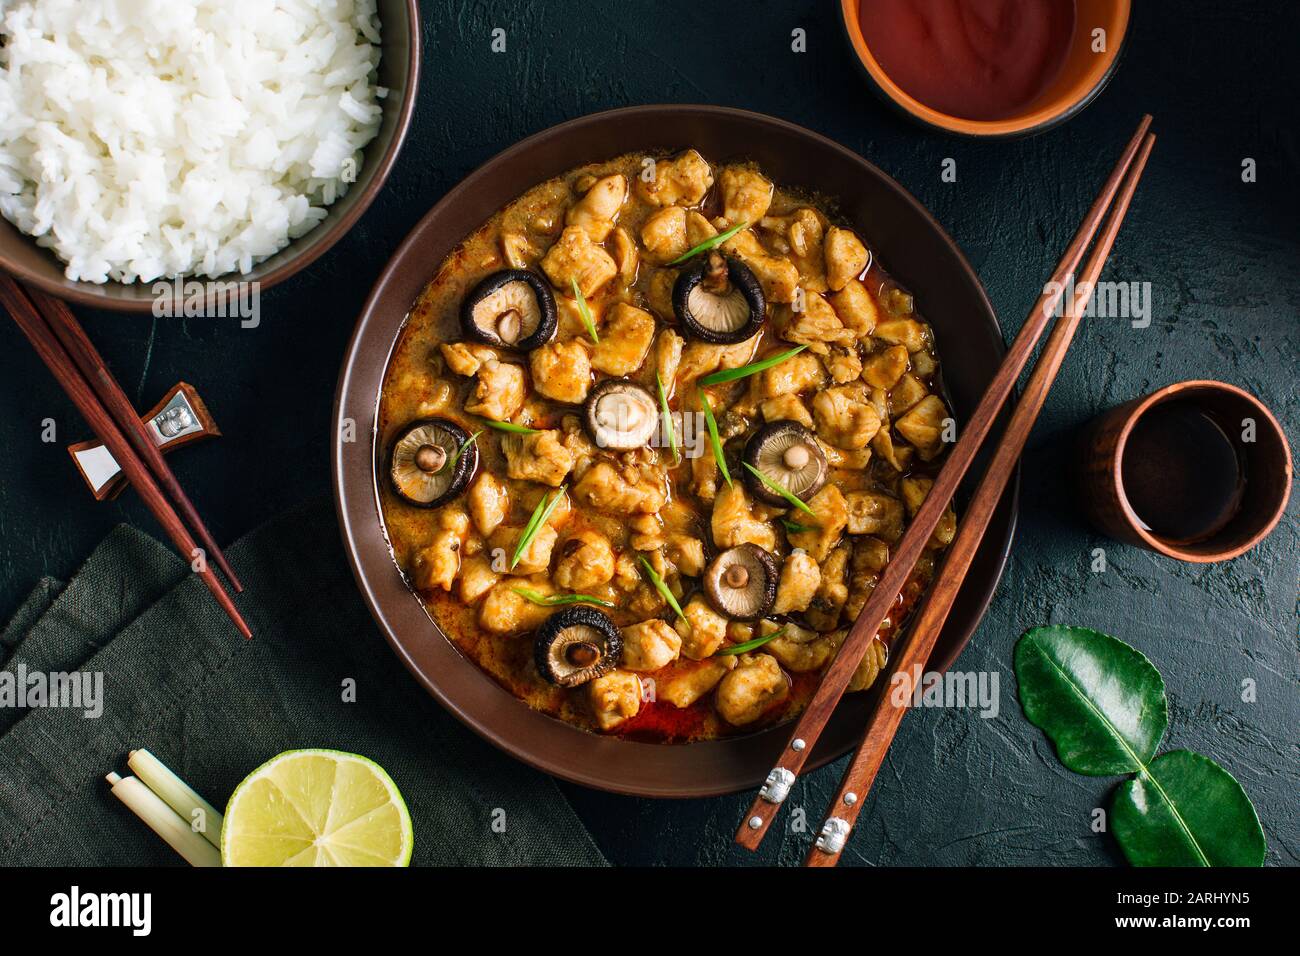 Panang Gai, Delicious spicy Thai food of chicken with shiitaki mushrooms on a black background Stock Photo